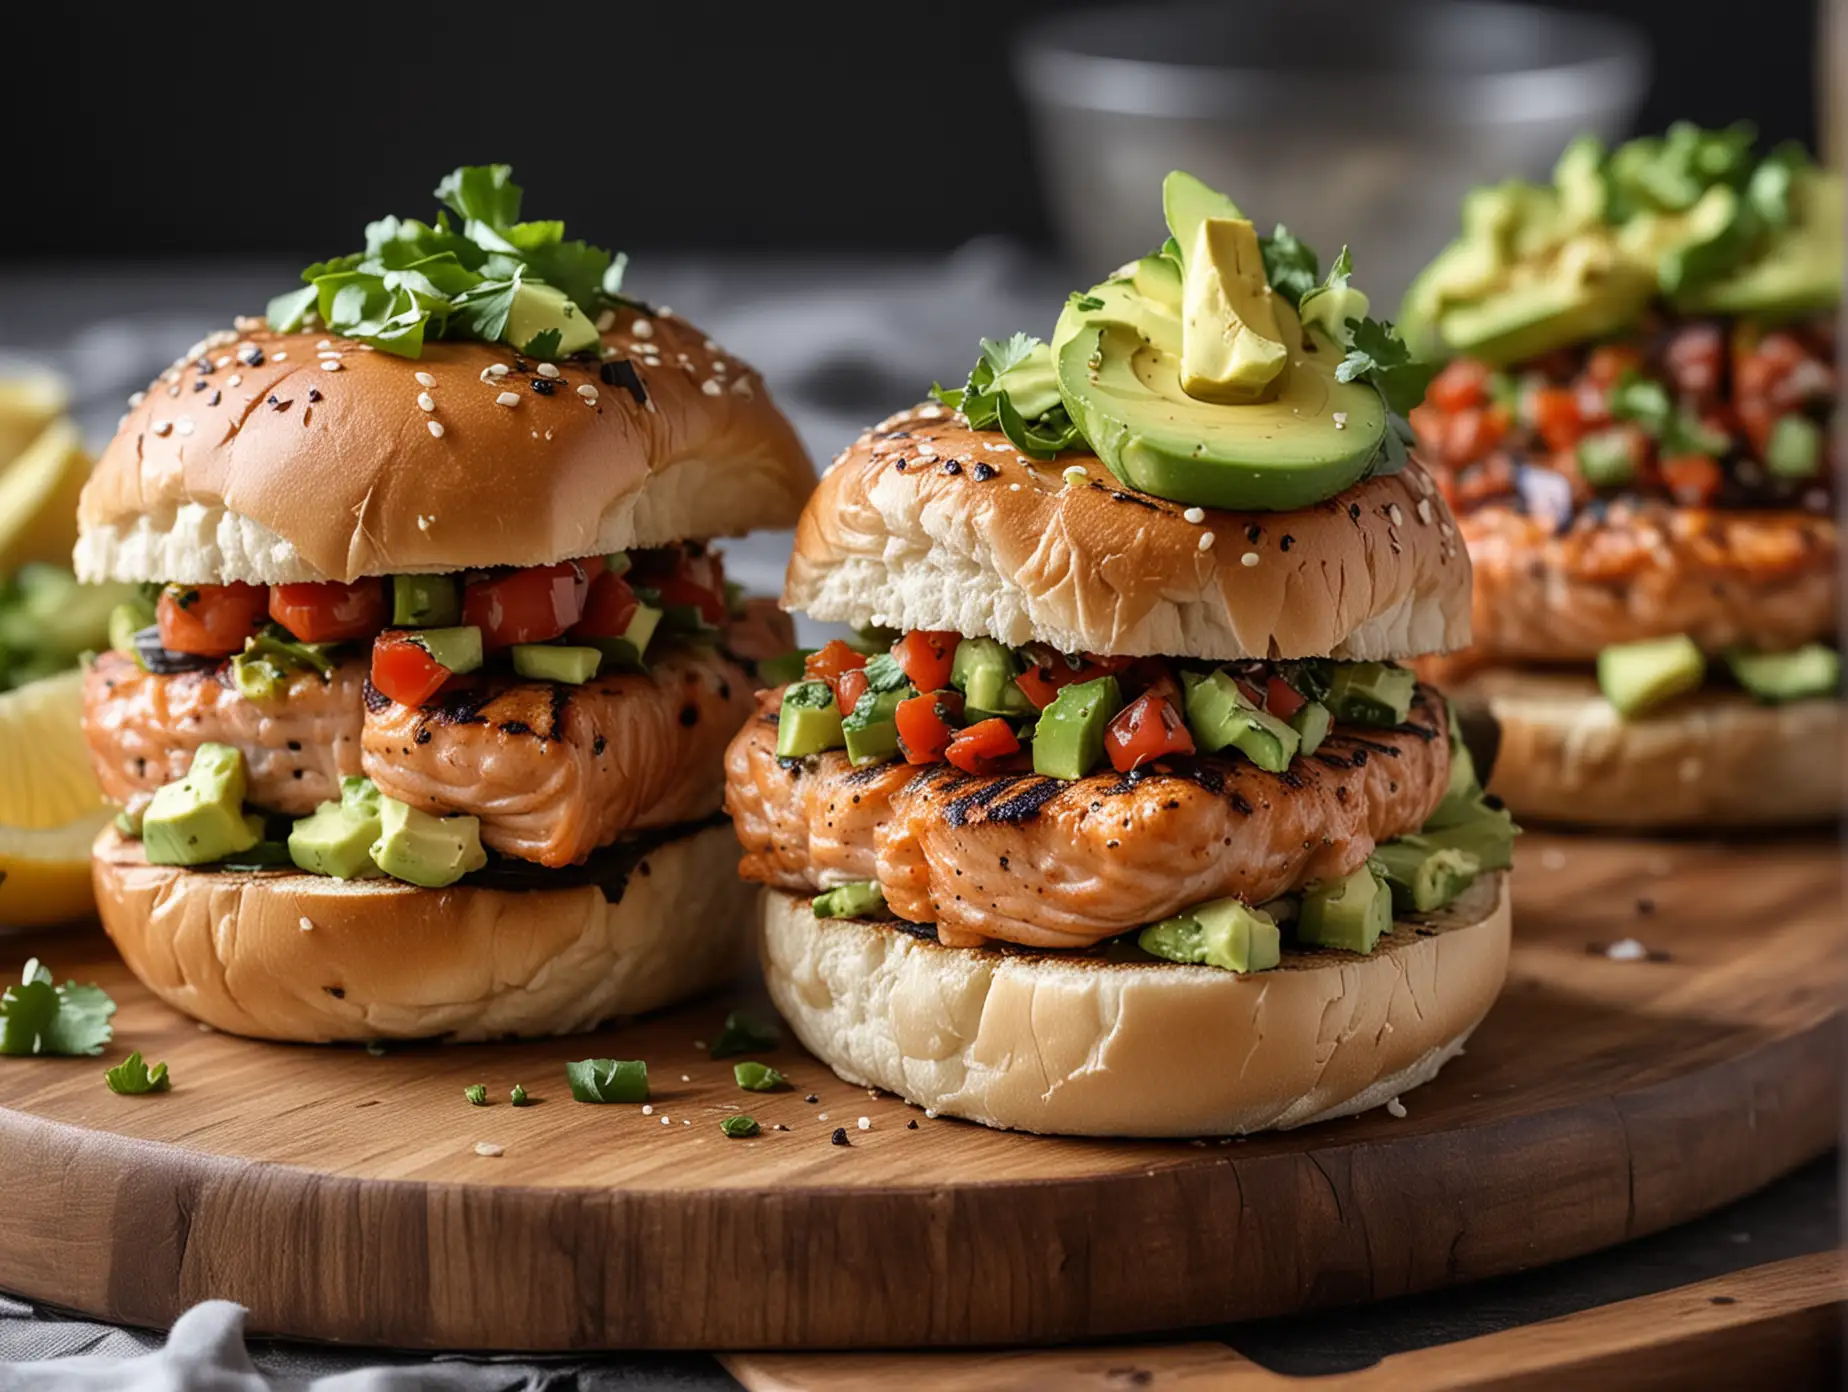 Luxurious Grilled Salmon Burgers with Avocado Salsa Tempting Food Photography